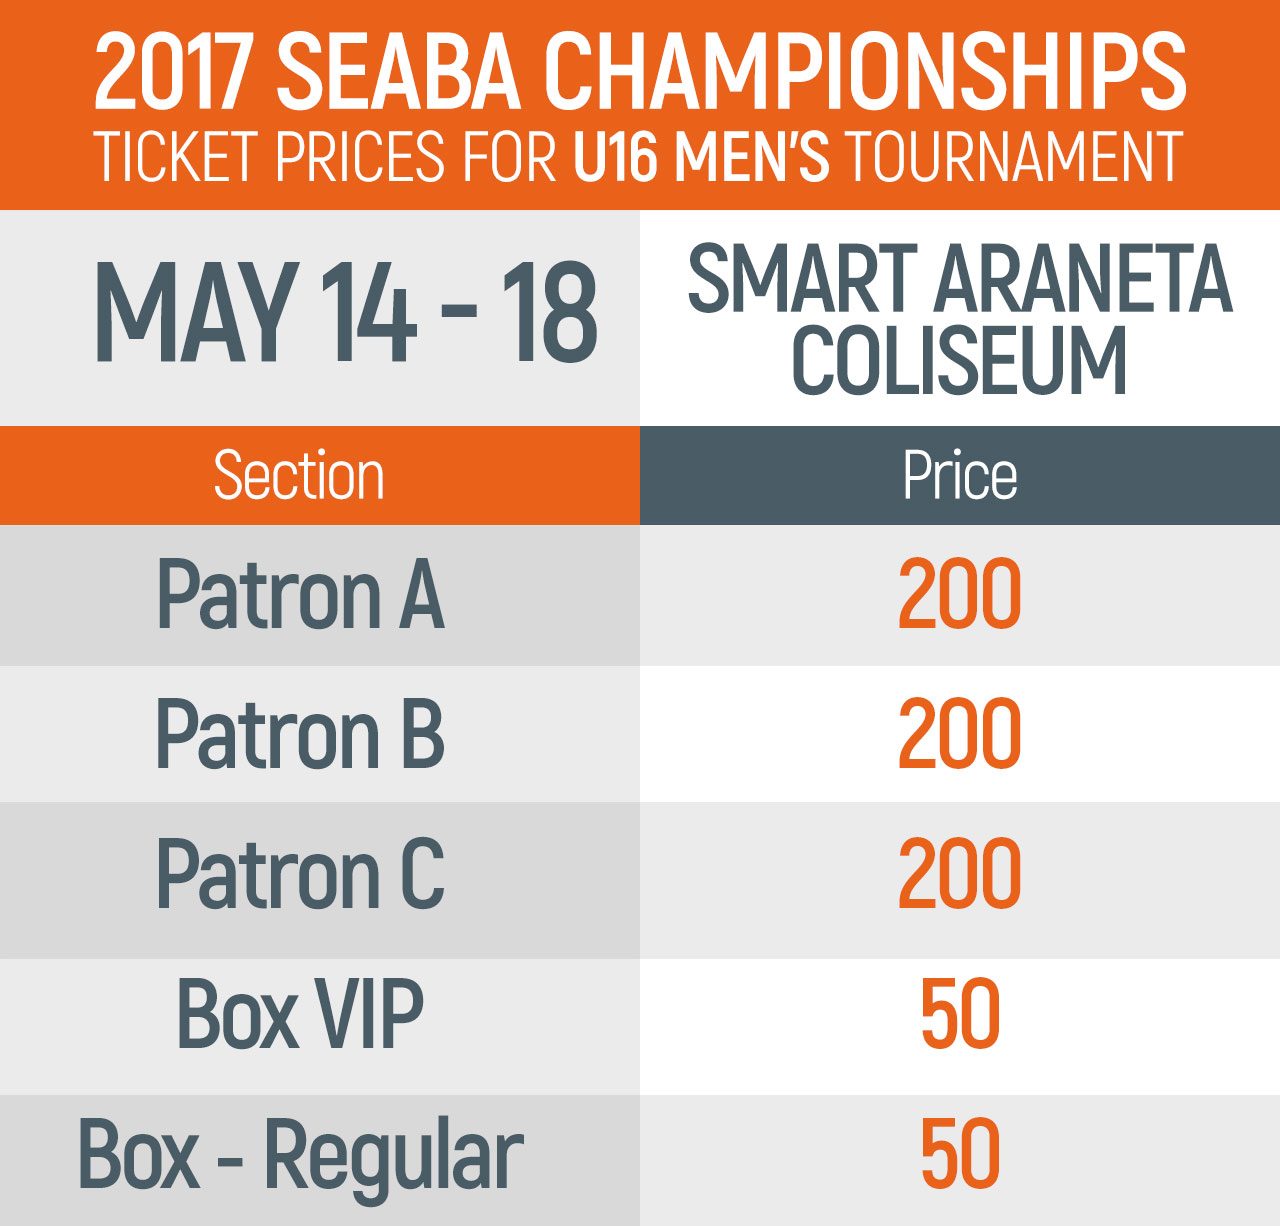 Schedule and ticket prices 2017 SEABA Championships in Manila